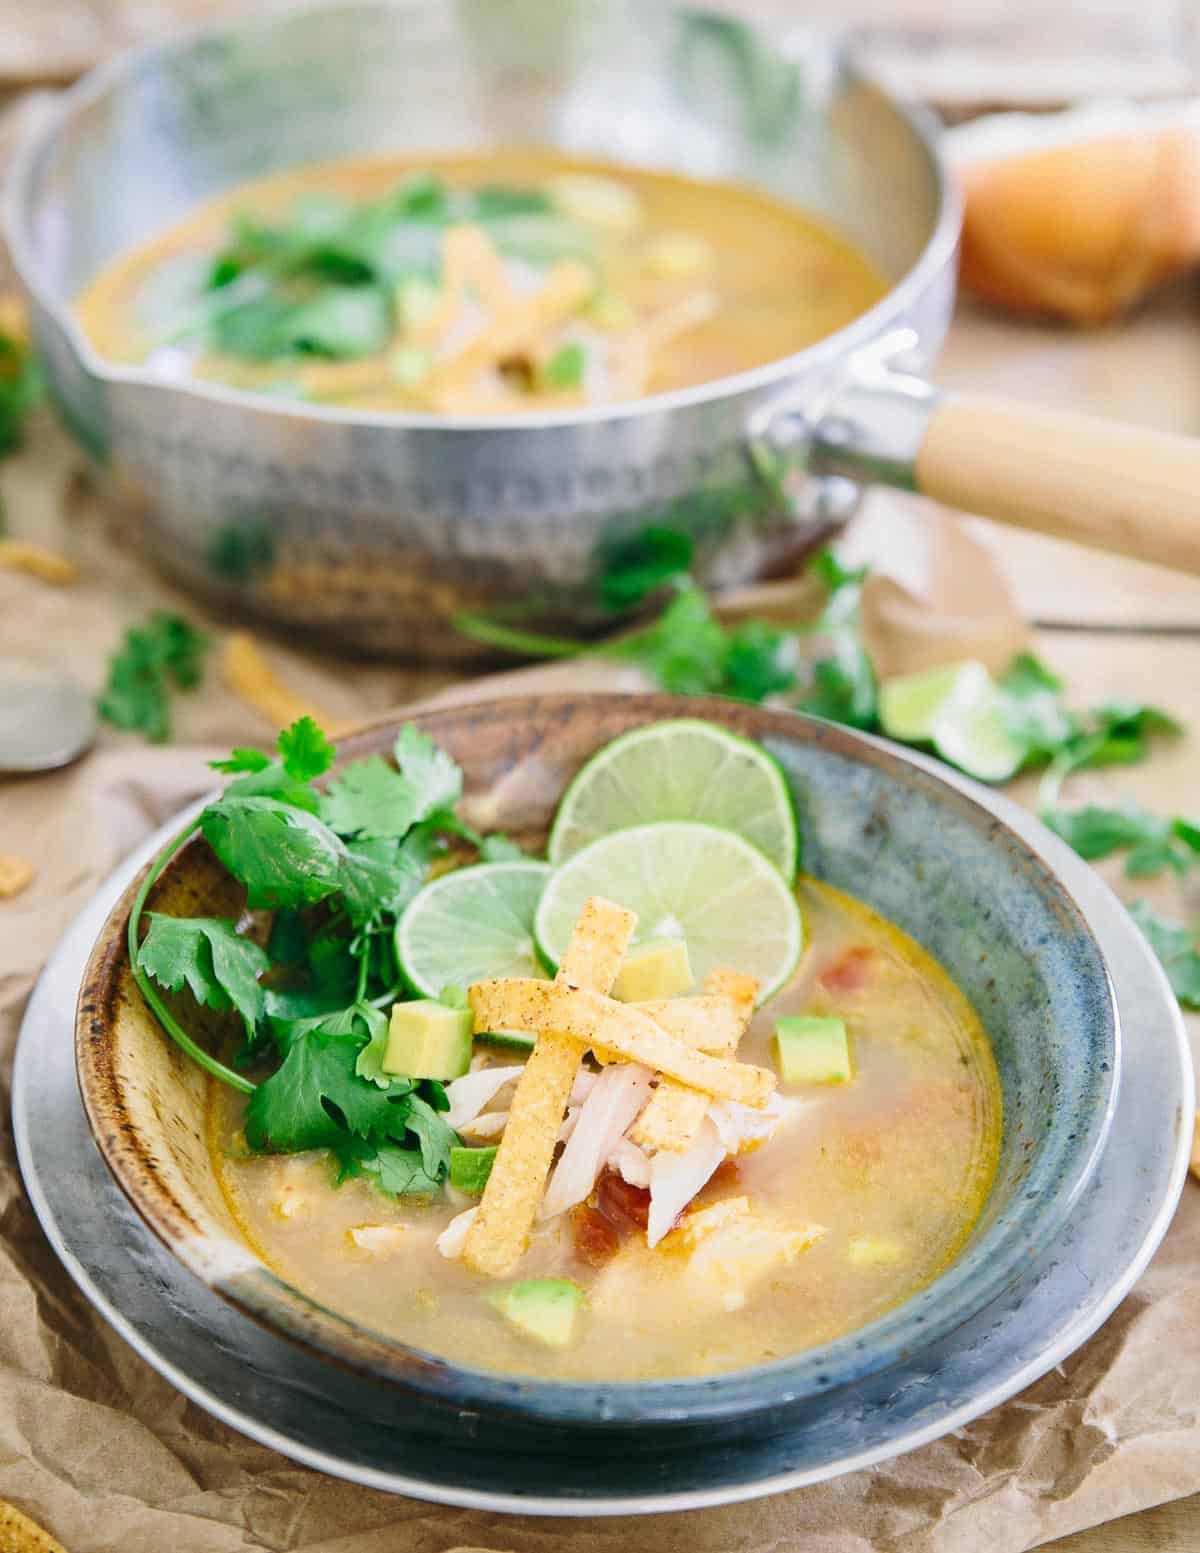 This Sopa de Lima (Mexican Lime Soup) recipe comes from Mexico Lindo Cooking School in Cancun. A classic, simple dish so full of flavor from the Yucatan.